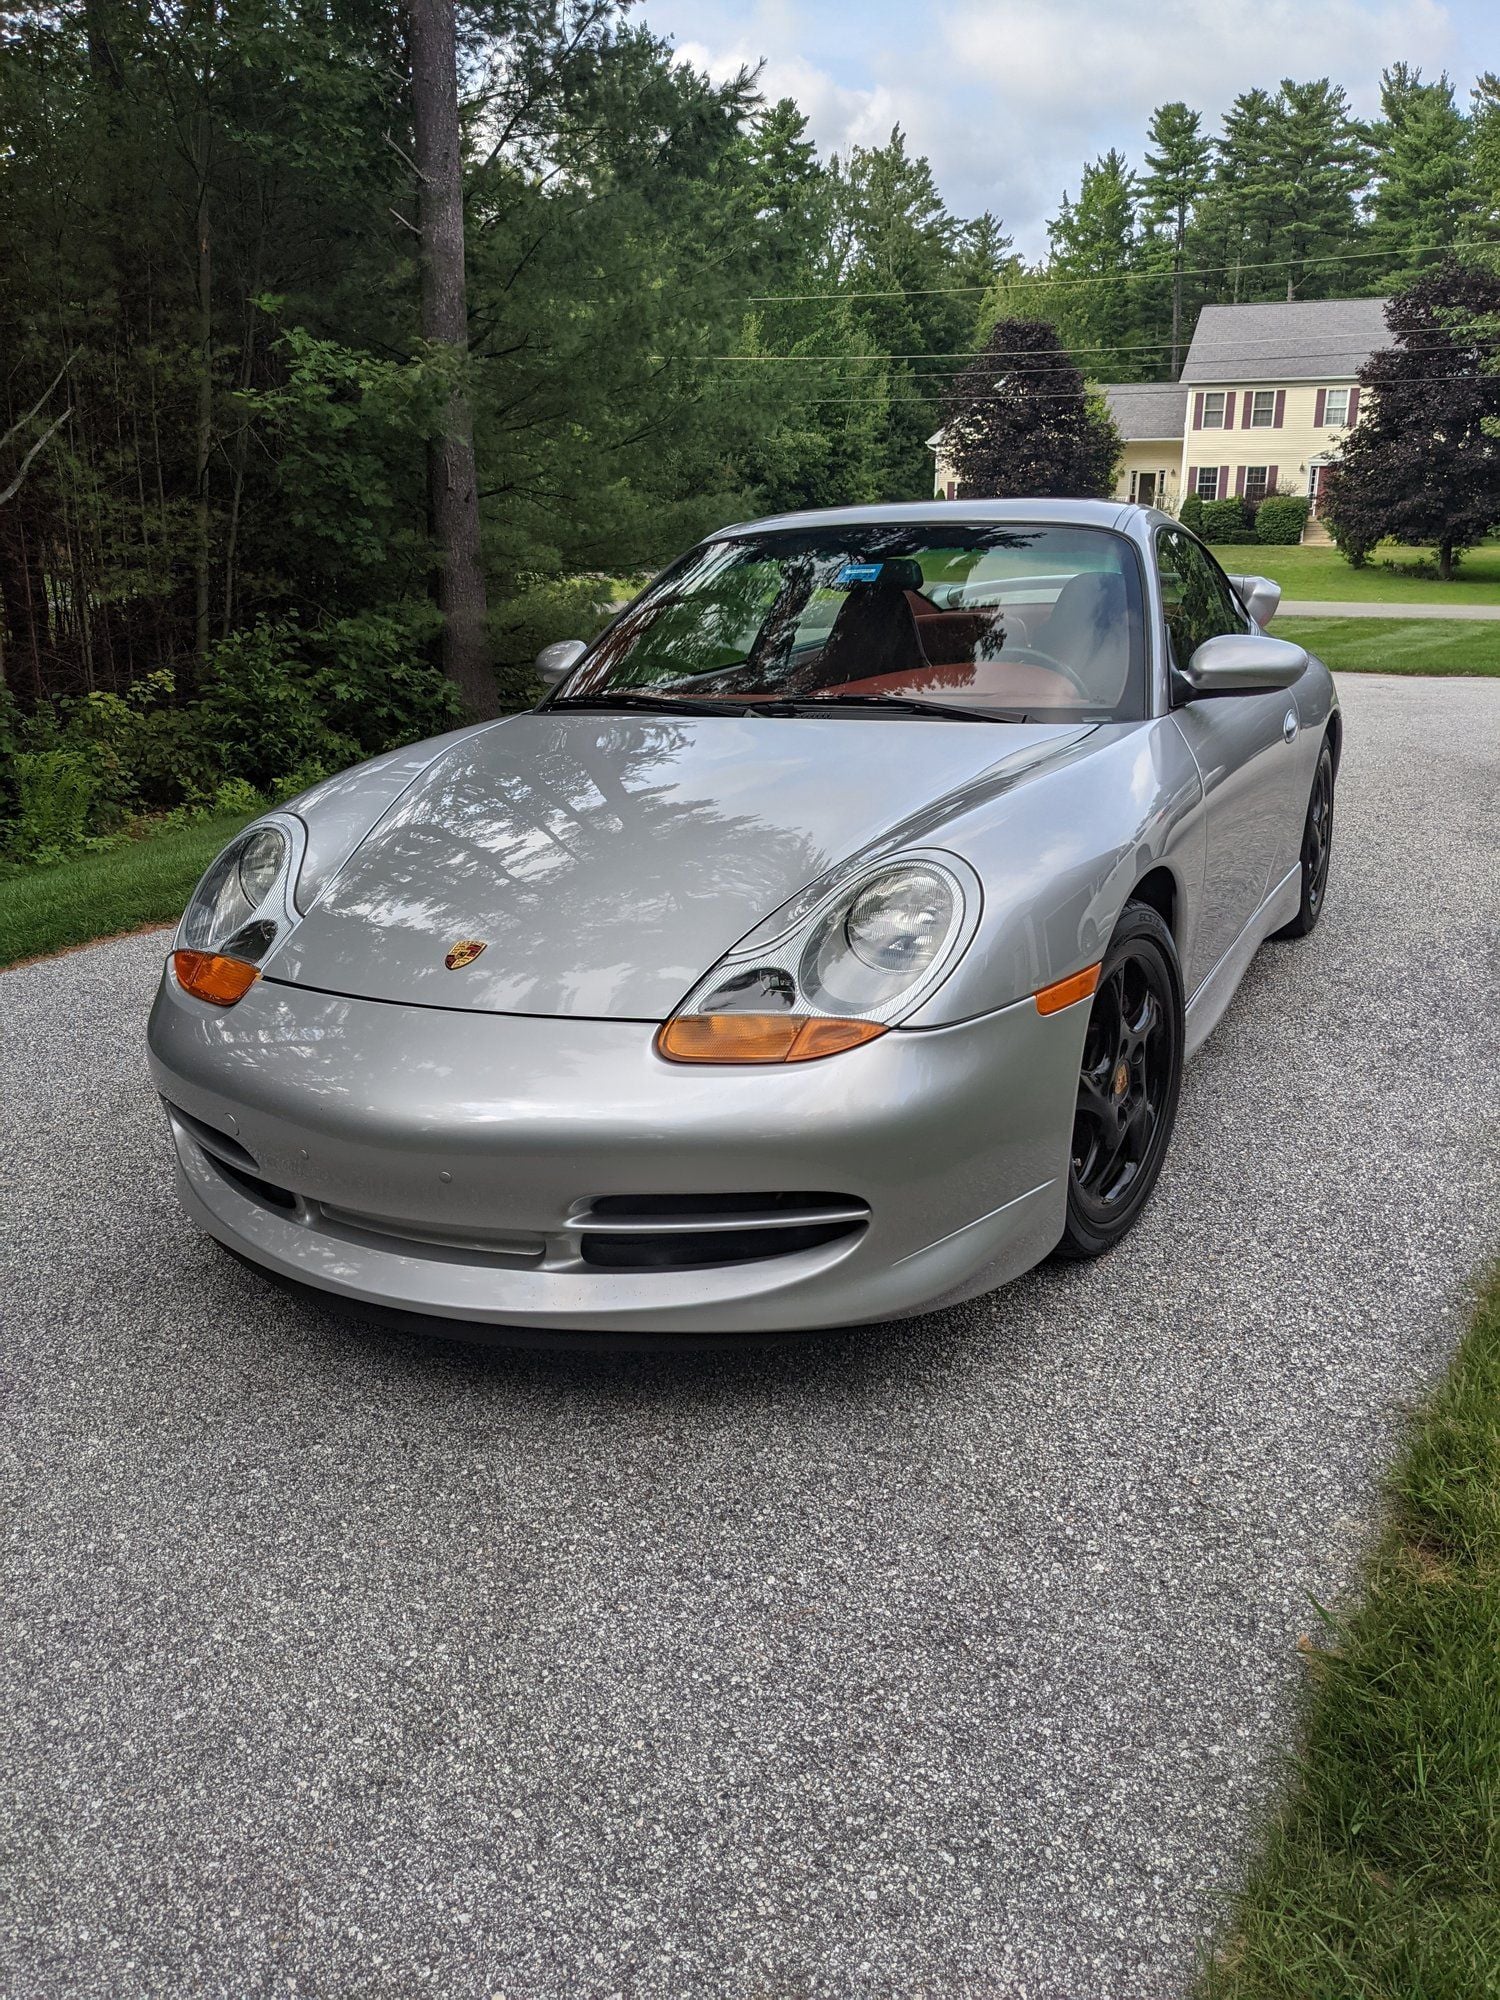 1999 Porsche 911 - 1999 (3/98) 6-speed Aerokit - 45k miles; LSD, sport package, hollow TTs, and more - Used - VIN WP0AA2991XS621602 - 45,500 Miles - 6 cyl - 2WD - Manual - Coupe - Silver - Hampden, ME 04444, United States